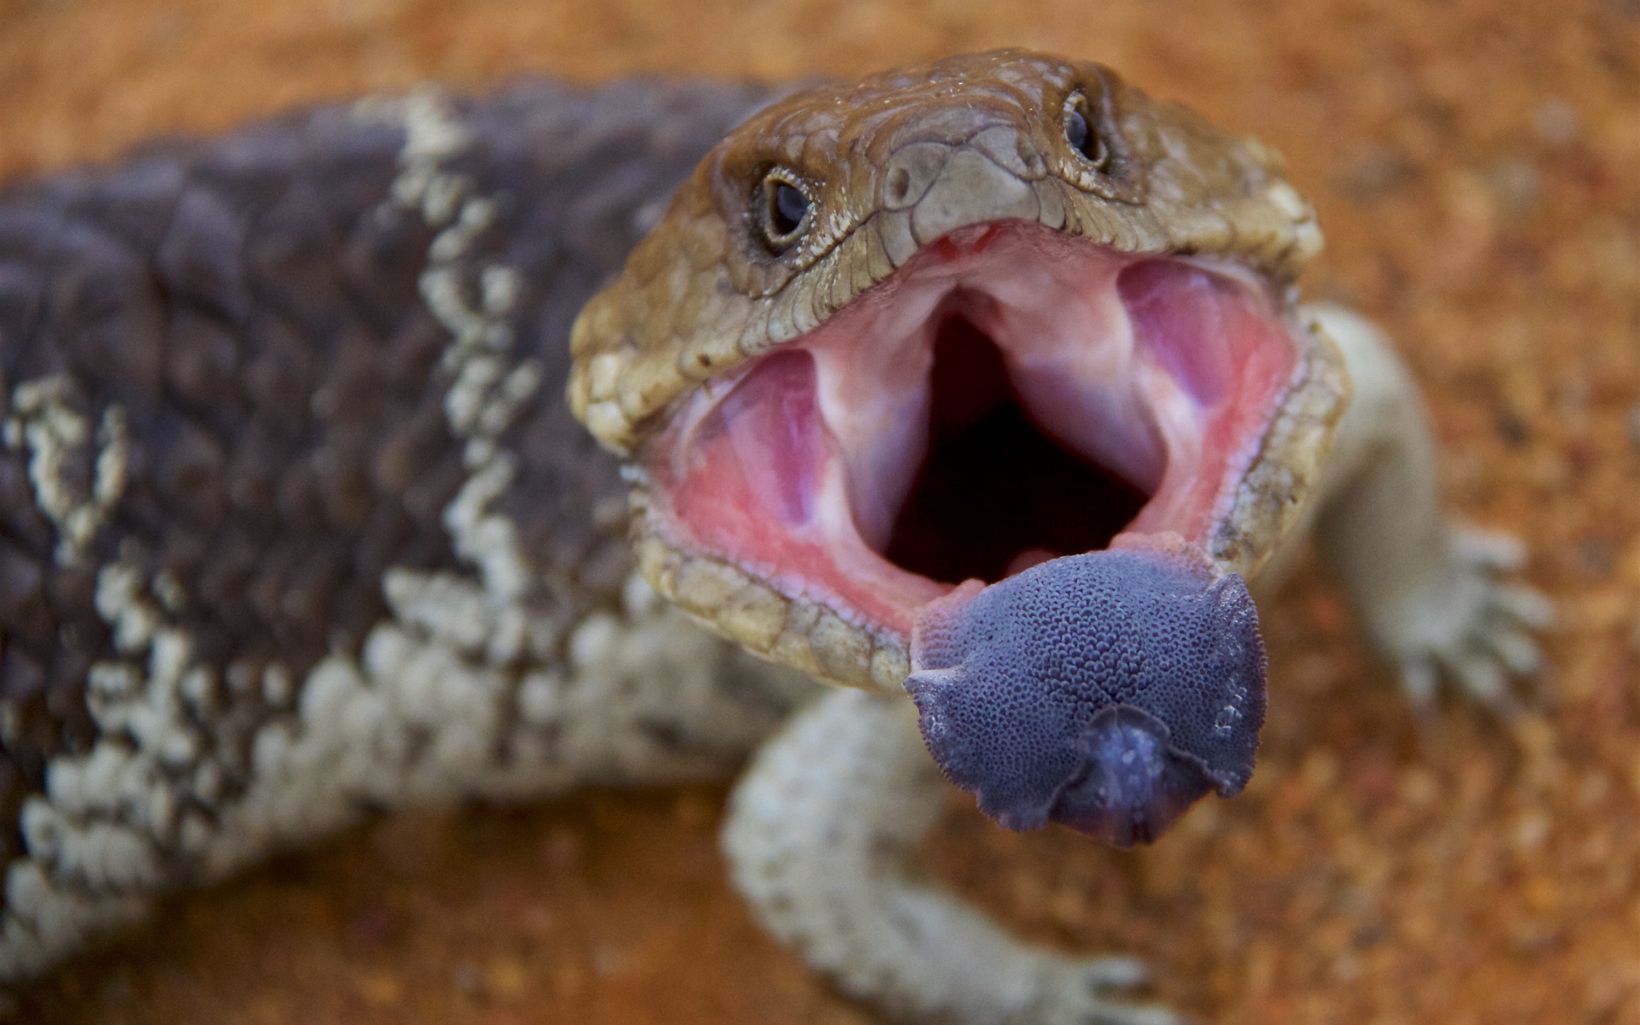 a short-tailed, slow-moving species of blue-tongued skink found in Australia